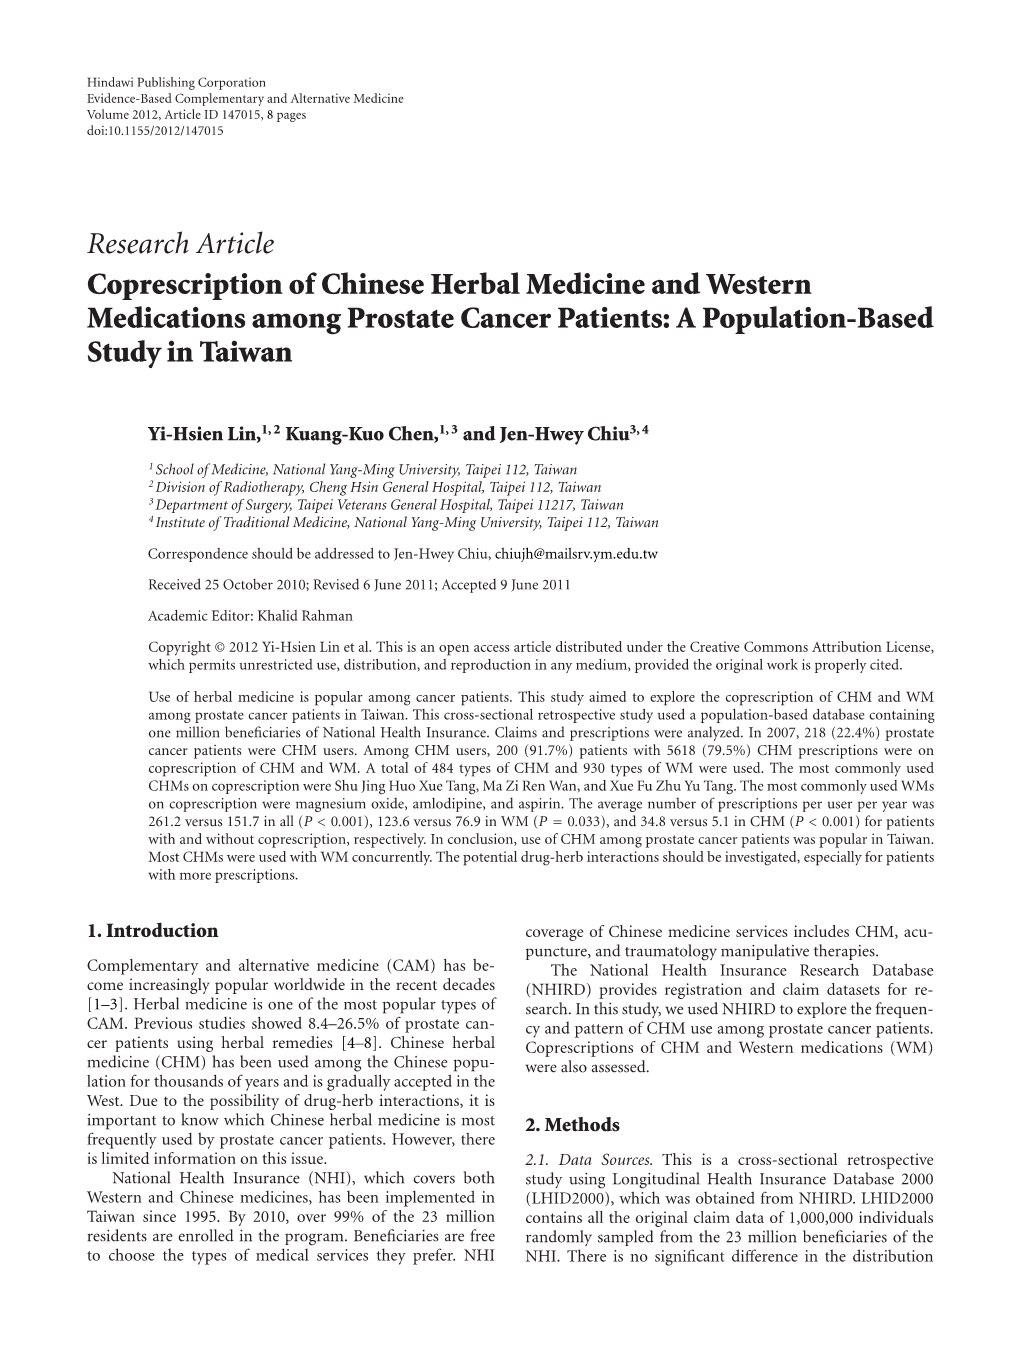 Research Article Coprescription of Chinese Herbal Medicine and Western Medications Among Prostate Cancer Patients: a Population-Based Study in Taiwan